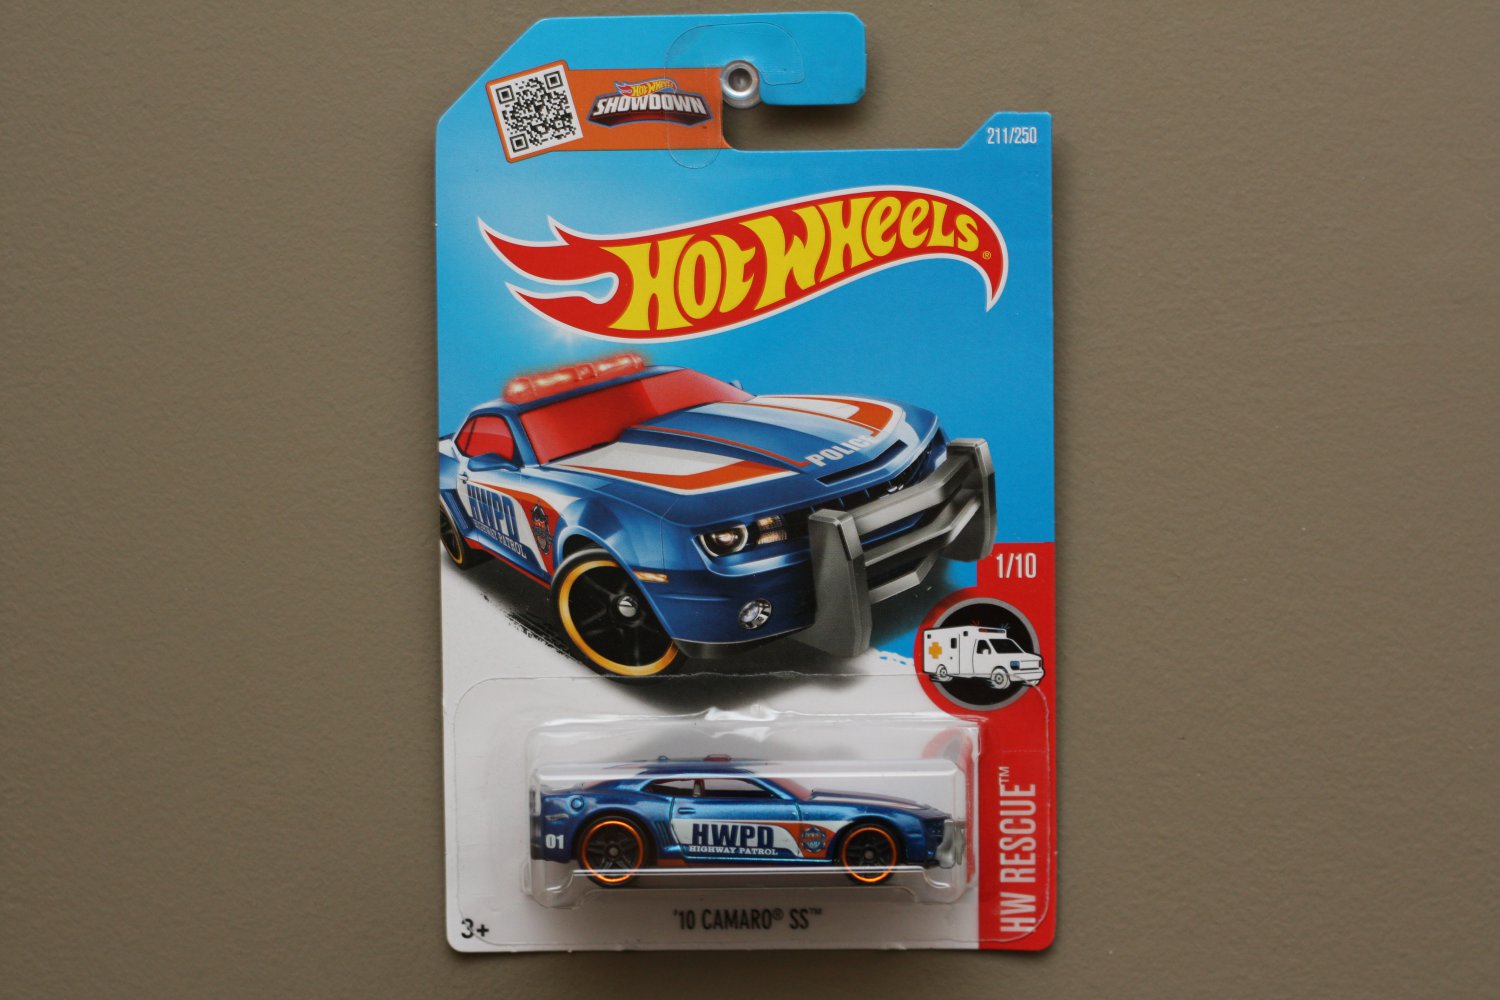 Hot Wheels Chevy Camaro Ss Blue Hwpd Police Car Rescue Loose Hot Sex Picture 5716